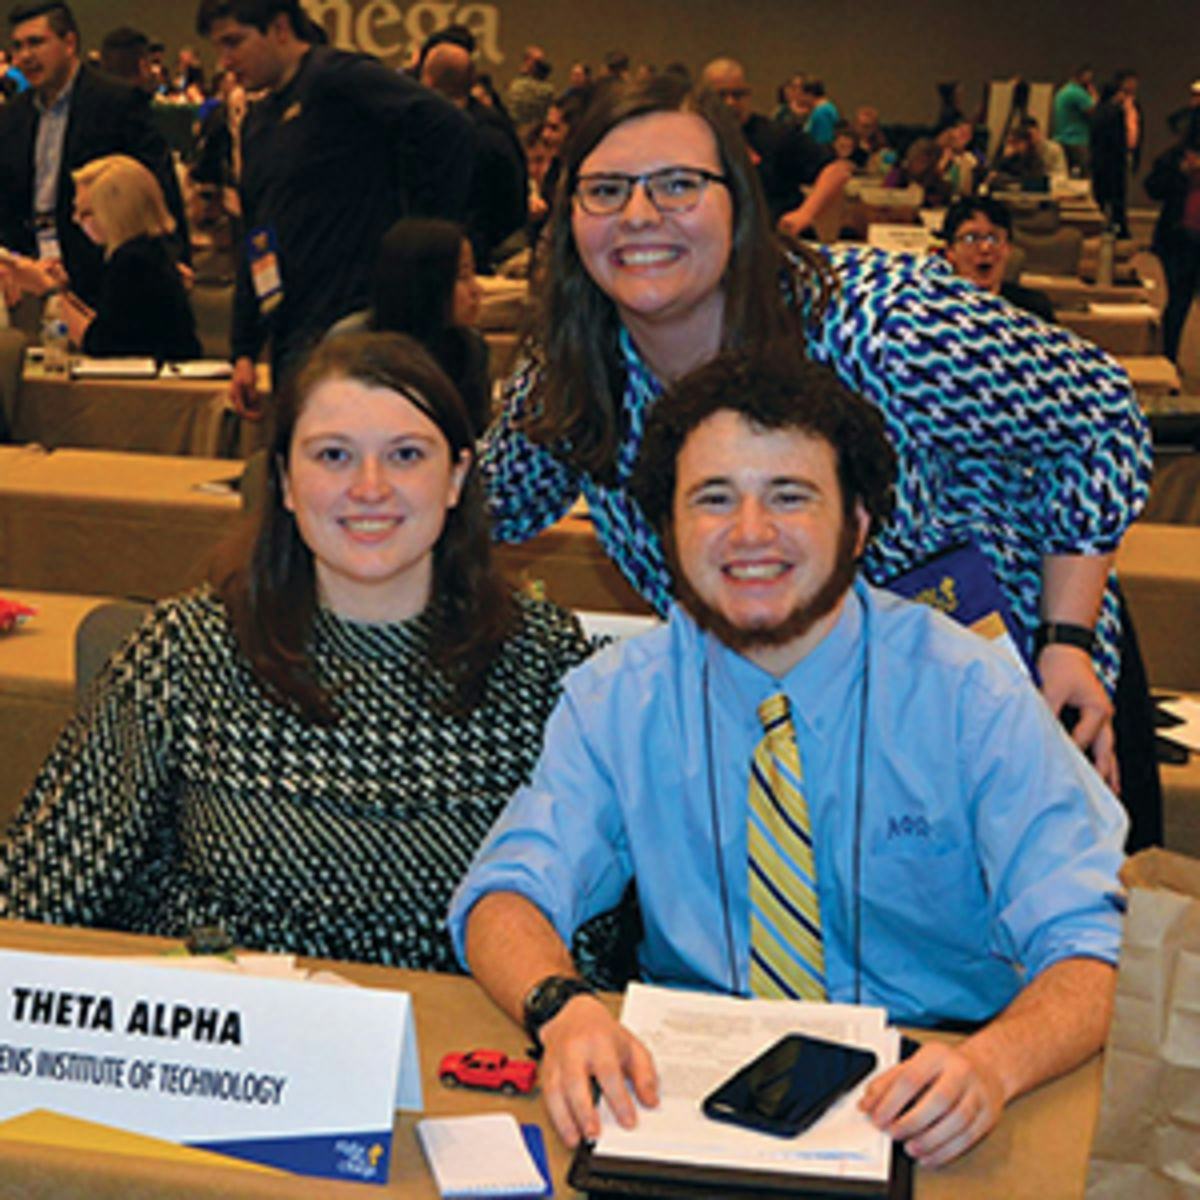 Then-undergraduates Maggie Guilfoyle ’20 (left), Luke Langner ’20 M. Eng. ’21 (right) and Katie Brown ’17 M.Eng. ’18 (standing) at the 2018 Alpha Phi Omega National Convention.